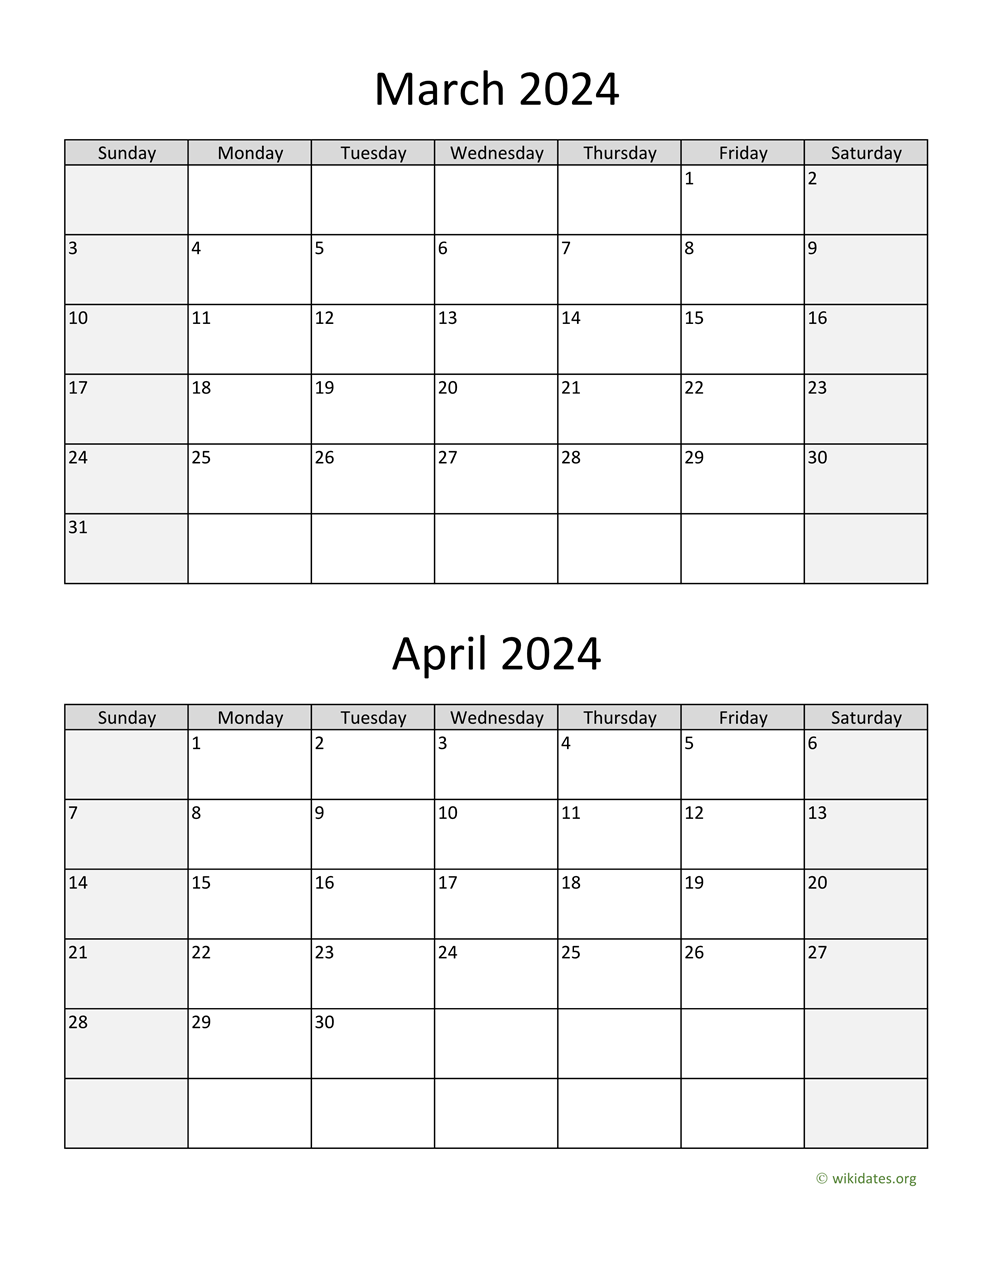 March And April 2024 Calendar | Wikidates for Printable Calendar March And April 2024